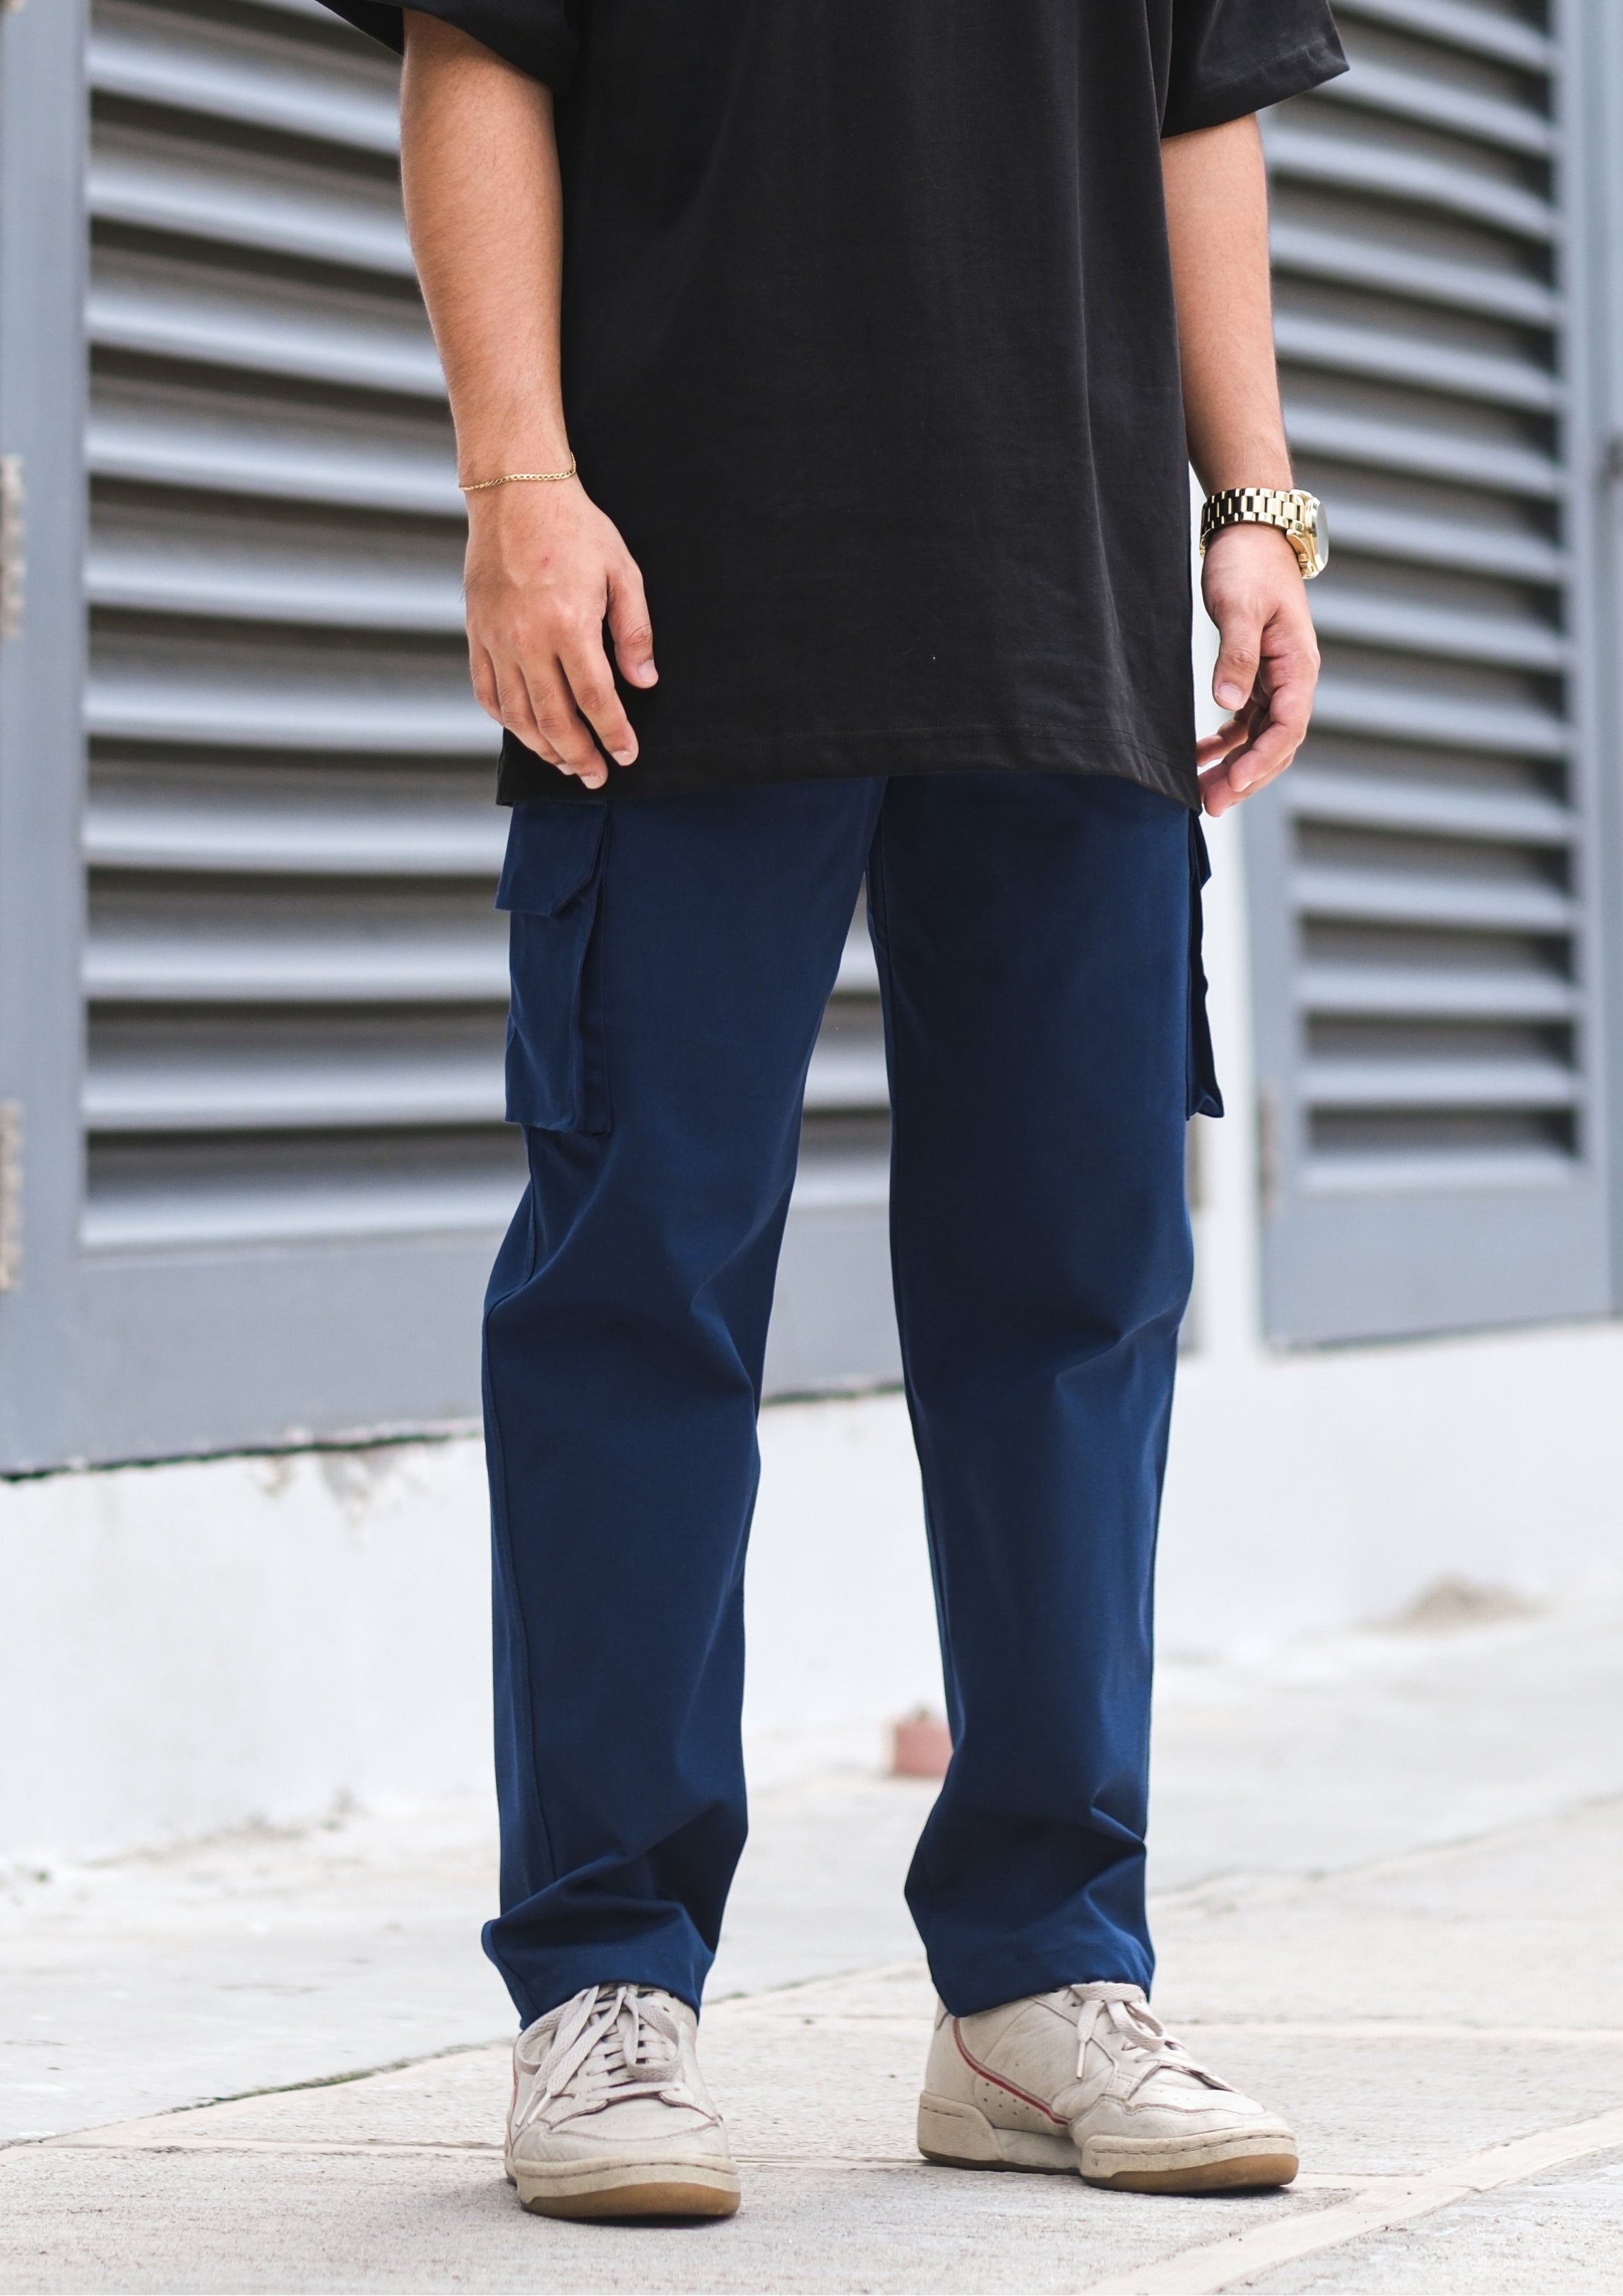 Buy Match Men's Loose-Fit Casual Cargo Pants(34,6069 Blue) at Amazon.in